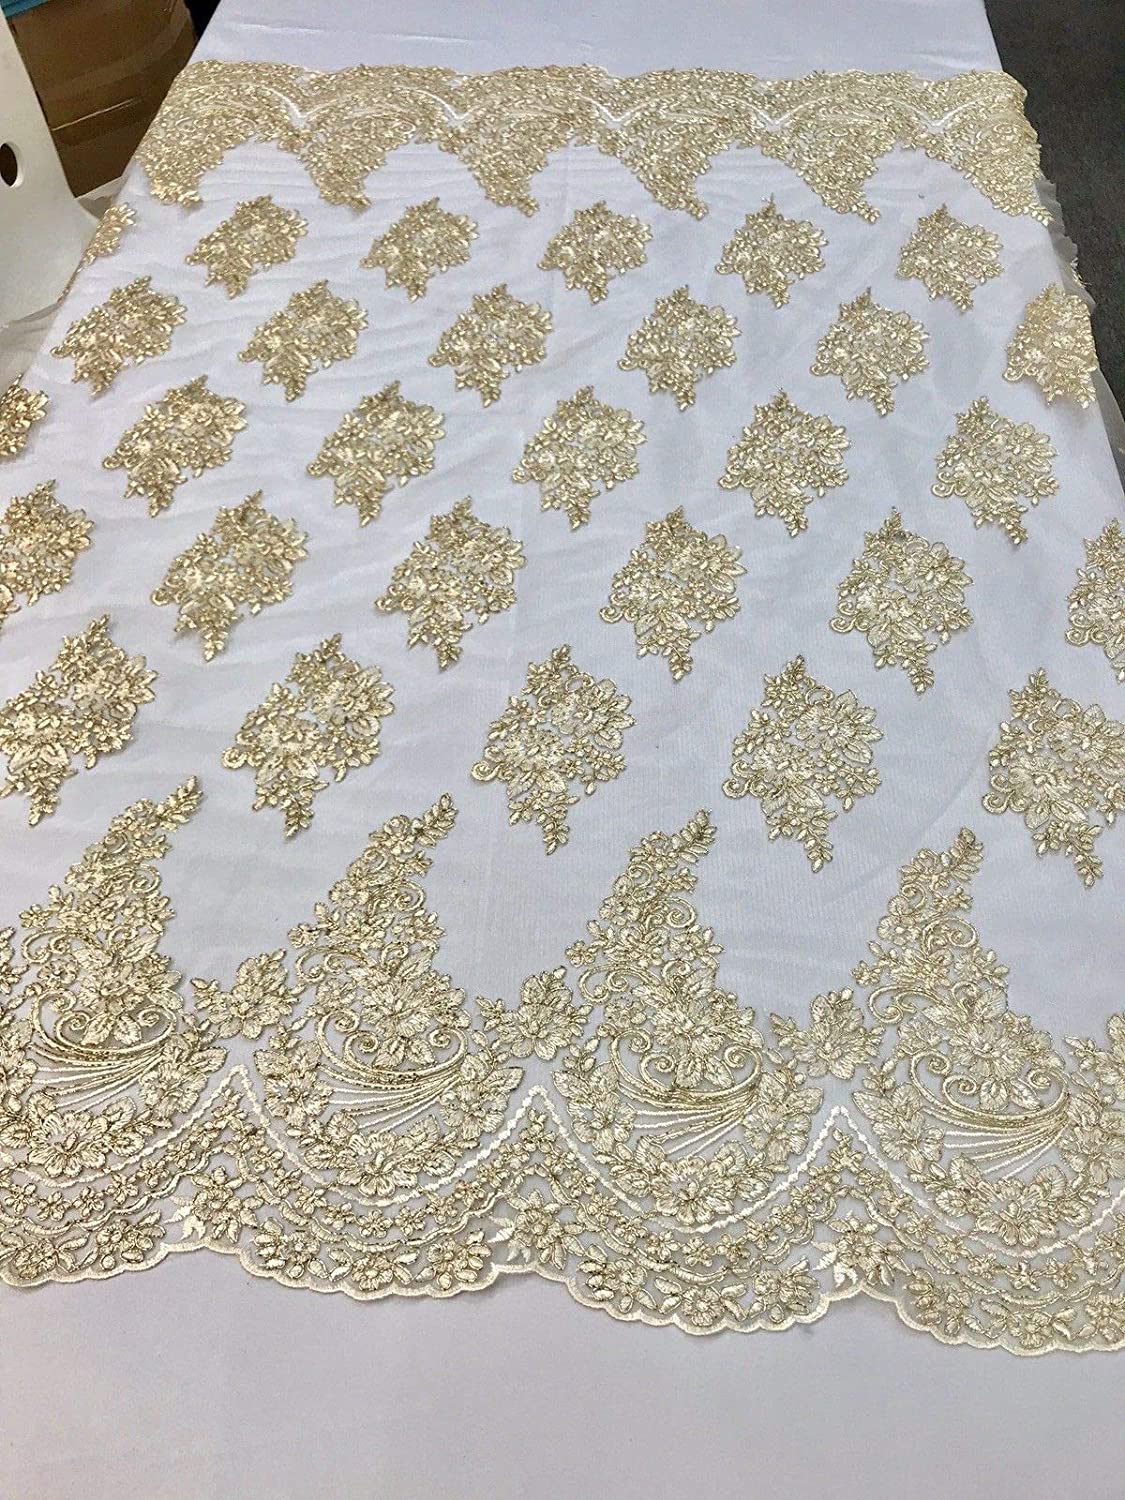 METALLIC LT-GOLD FLORAL DESIGN WITH CORD EMBROIDERY ON A MESH LACE-SOLD BY YARD.